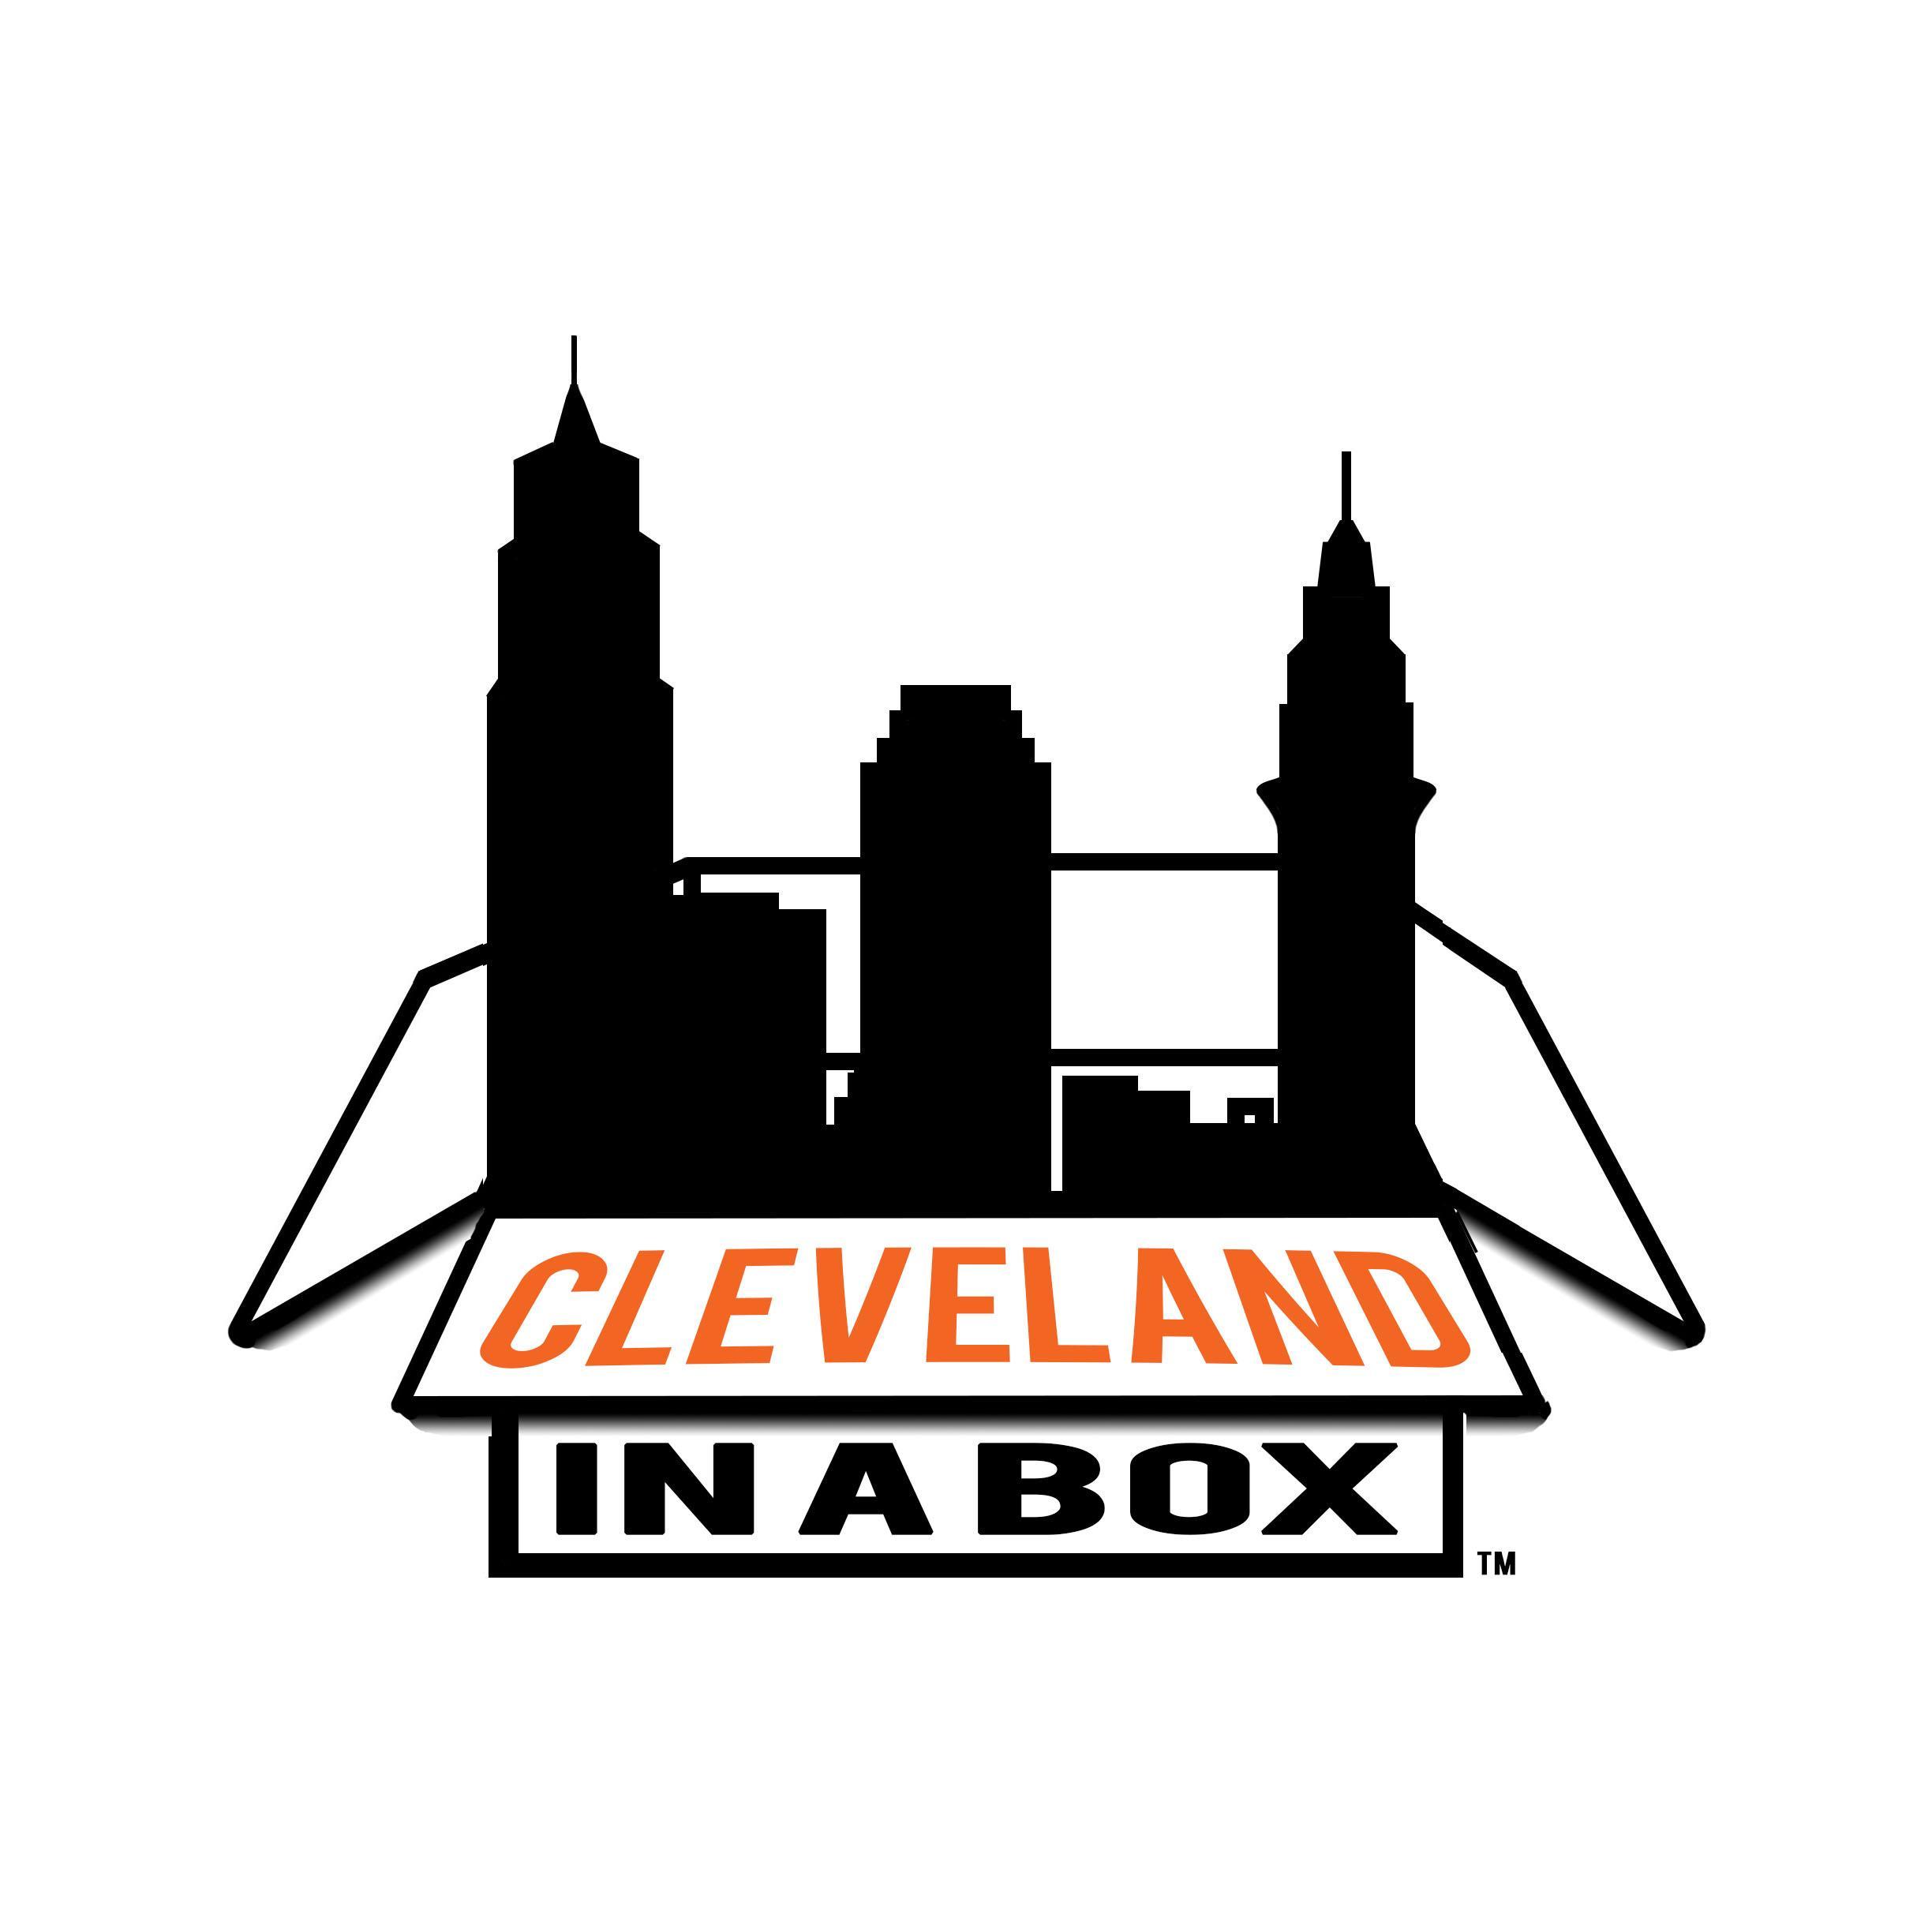 Help us spread a little Cleveland, one box at a time.